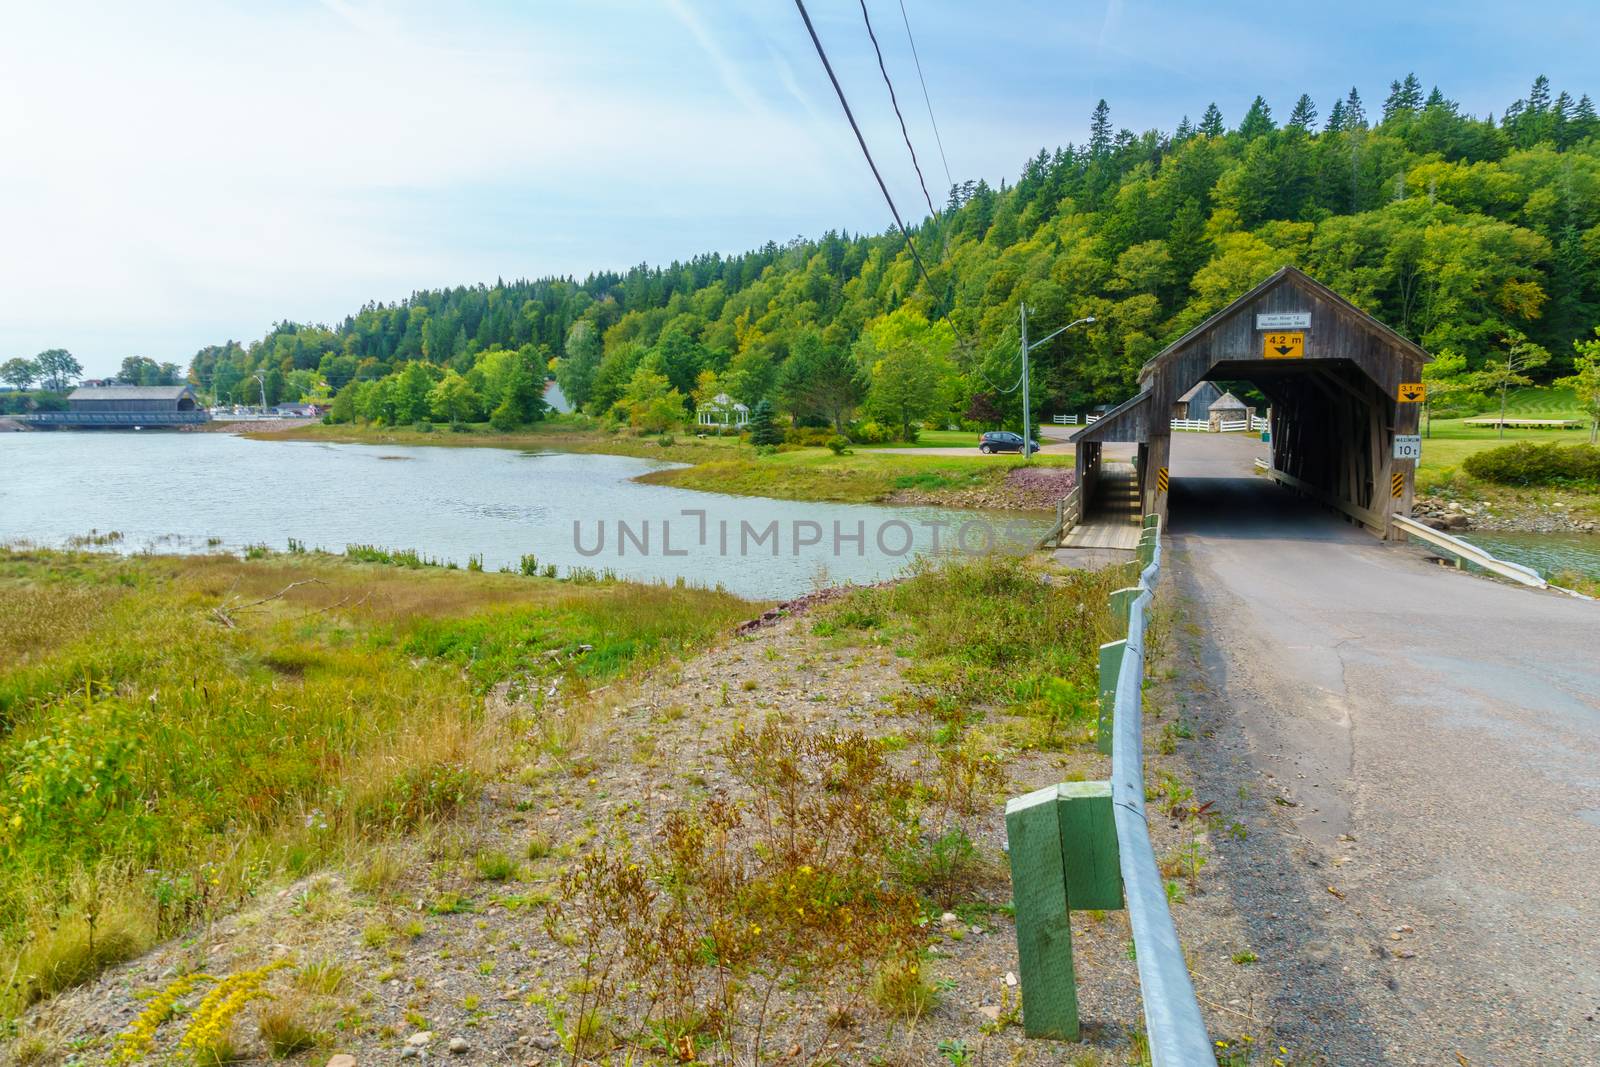 View of the two covered bridges at high tide, in St. Martins, New Brunswick, Canada